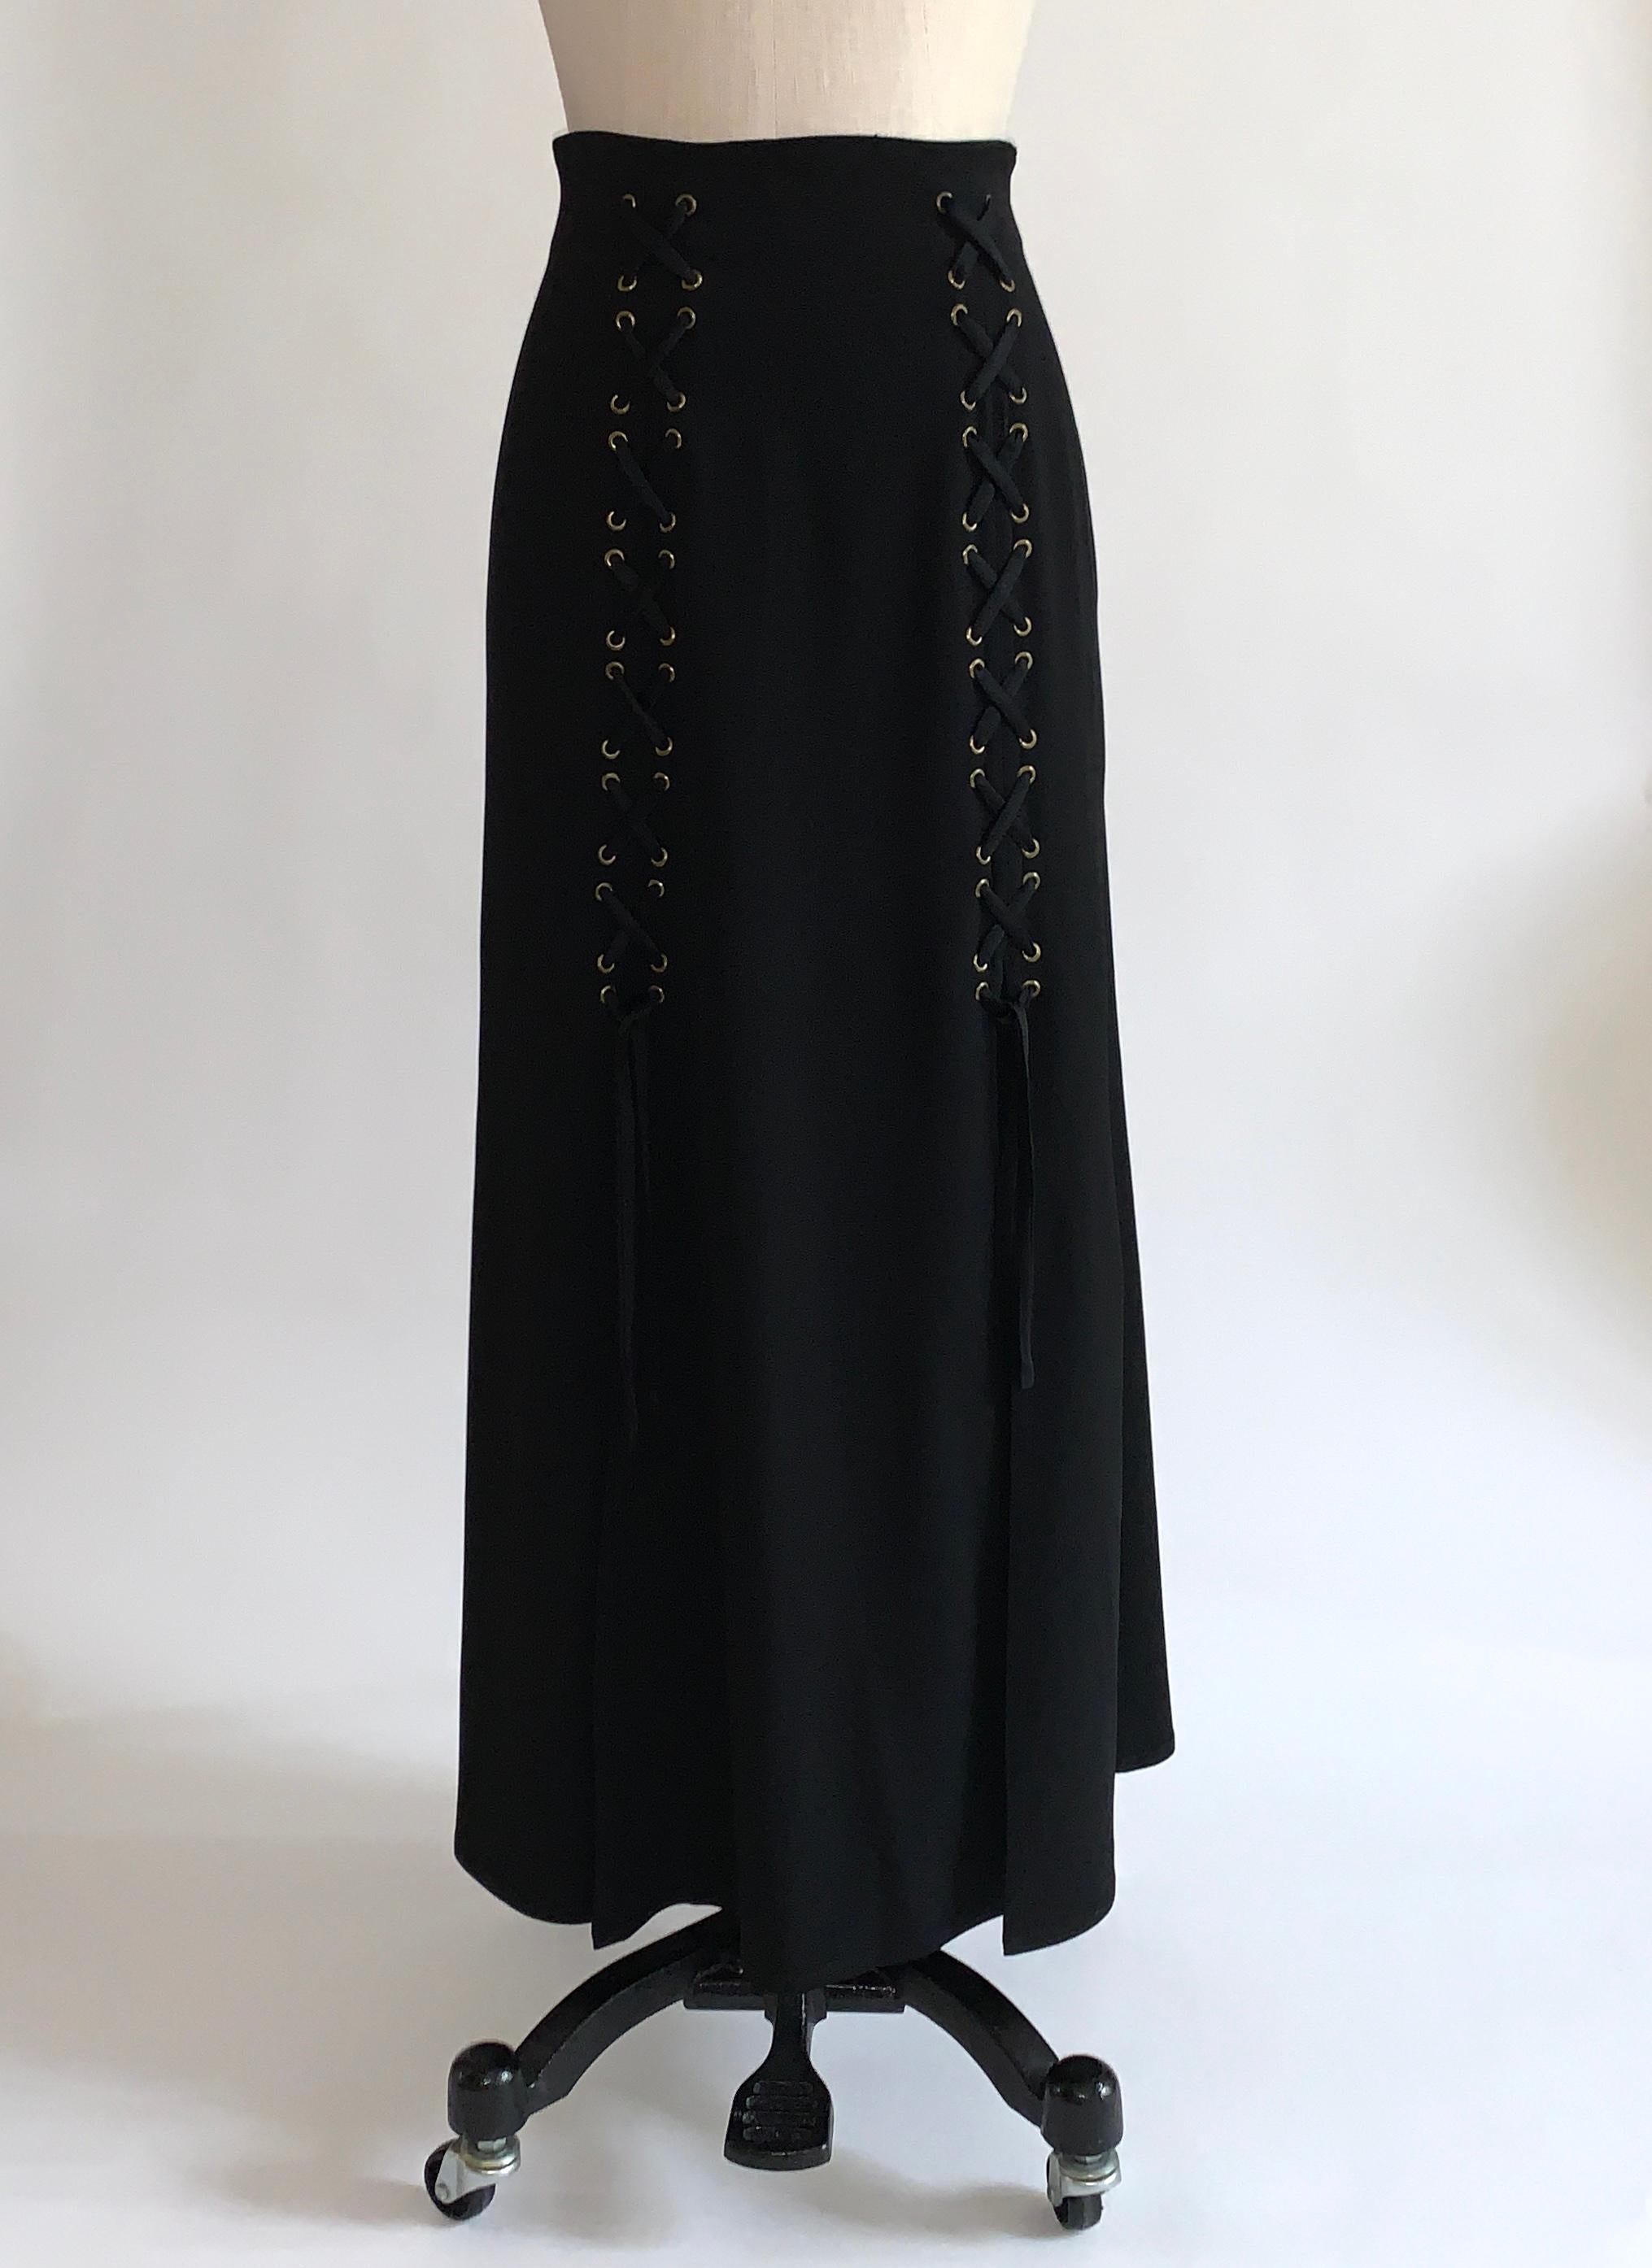 Moschino Cheap & Chic 1990s vintage black maxi length skirt with lace-up/corsetry detail at front. Bronze colored grommets with black lacing. Slits at end of lacing make this breezy and easy to move in! Side zip.

79% acetate, 21% rayon.

Made in